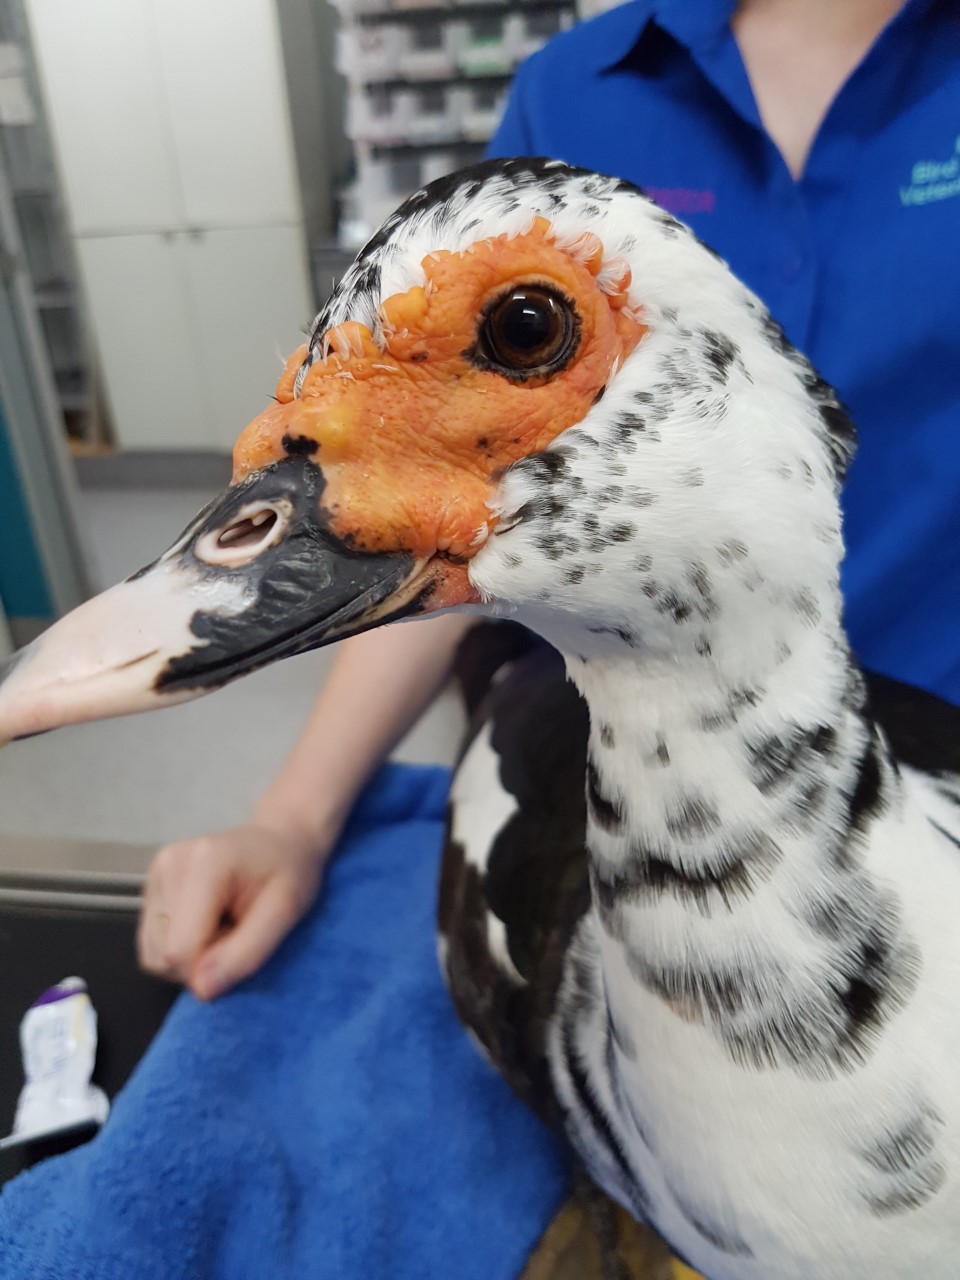 During the exam we make sure the nares and the eyes are clear – this lovely duck is a great example of lovely clear eyes and nares! 